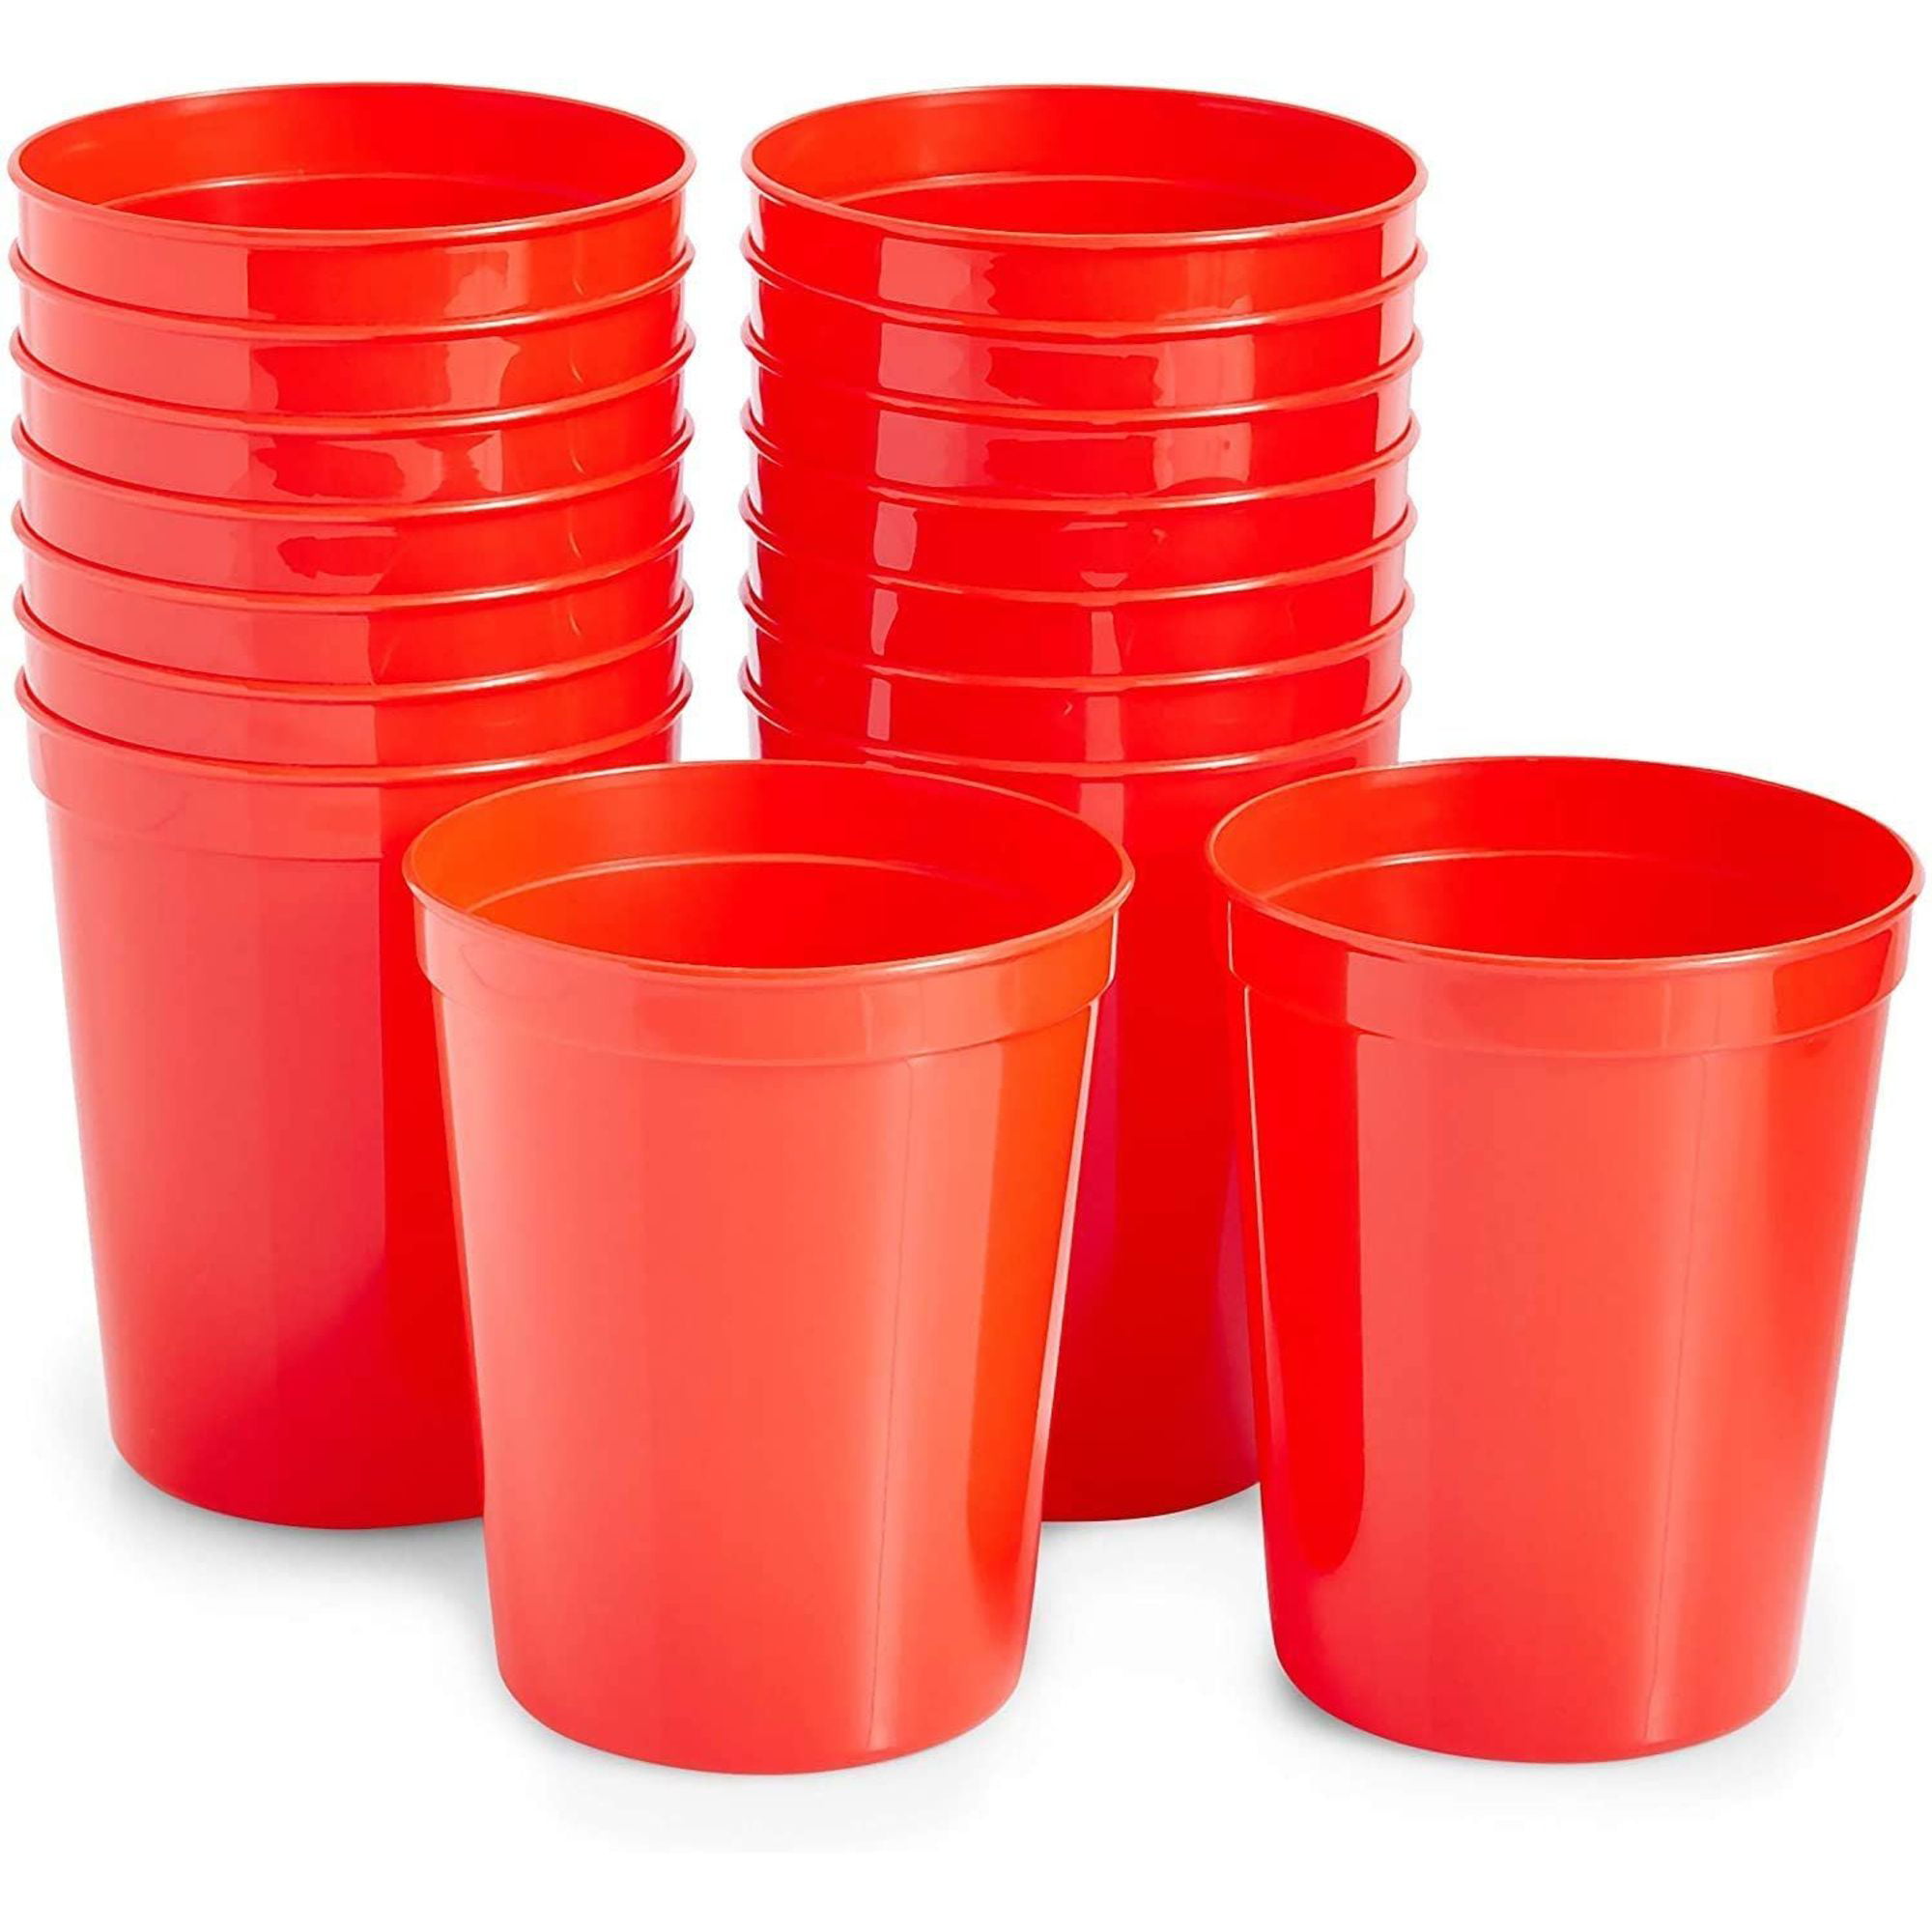 16-Pack Reusable Plastic Cup Party Tumblers Stadium Cups (16 oz each